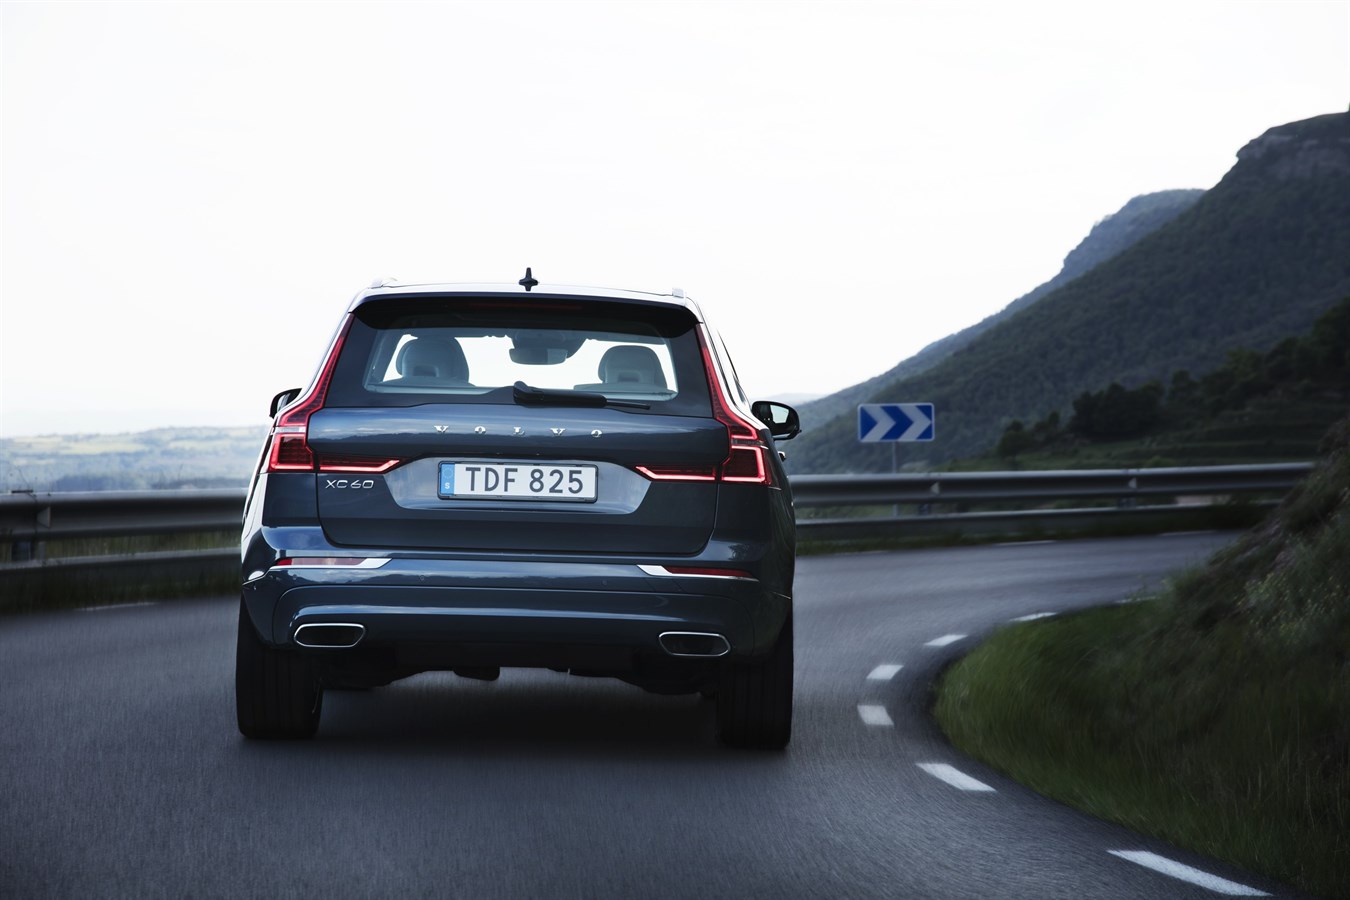 The new Volvo XC60 T6